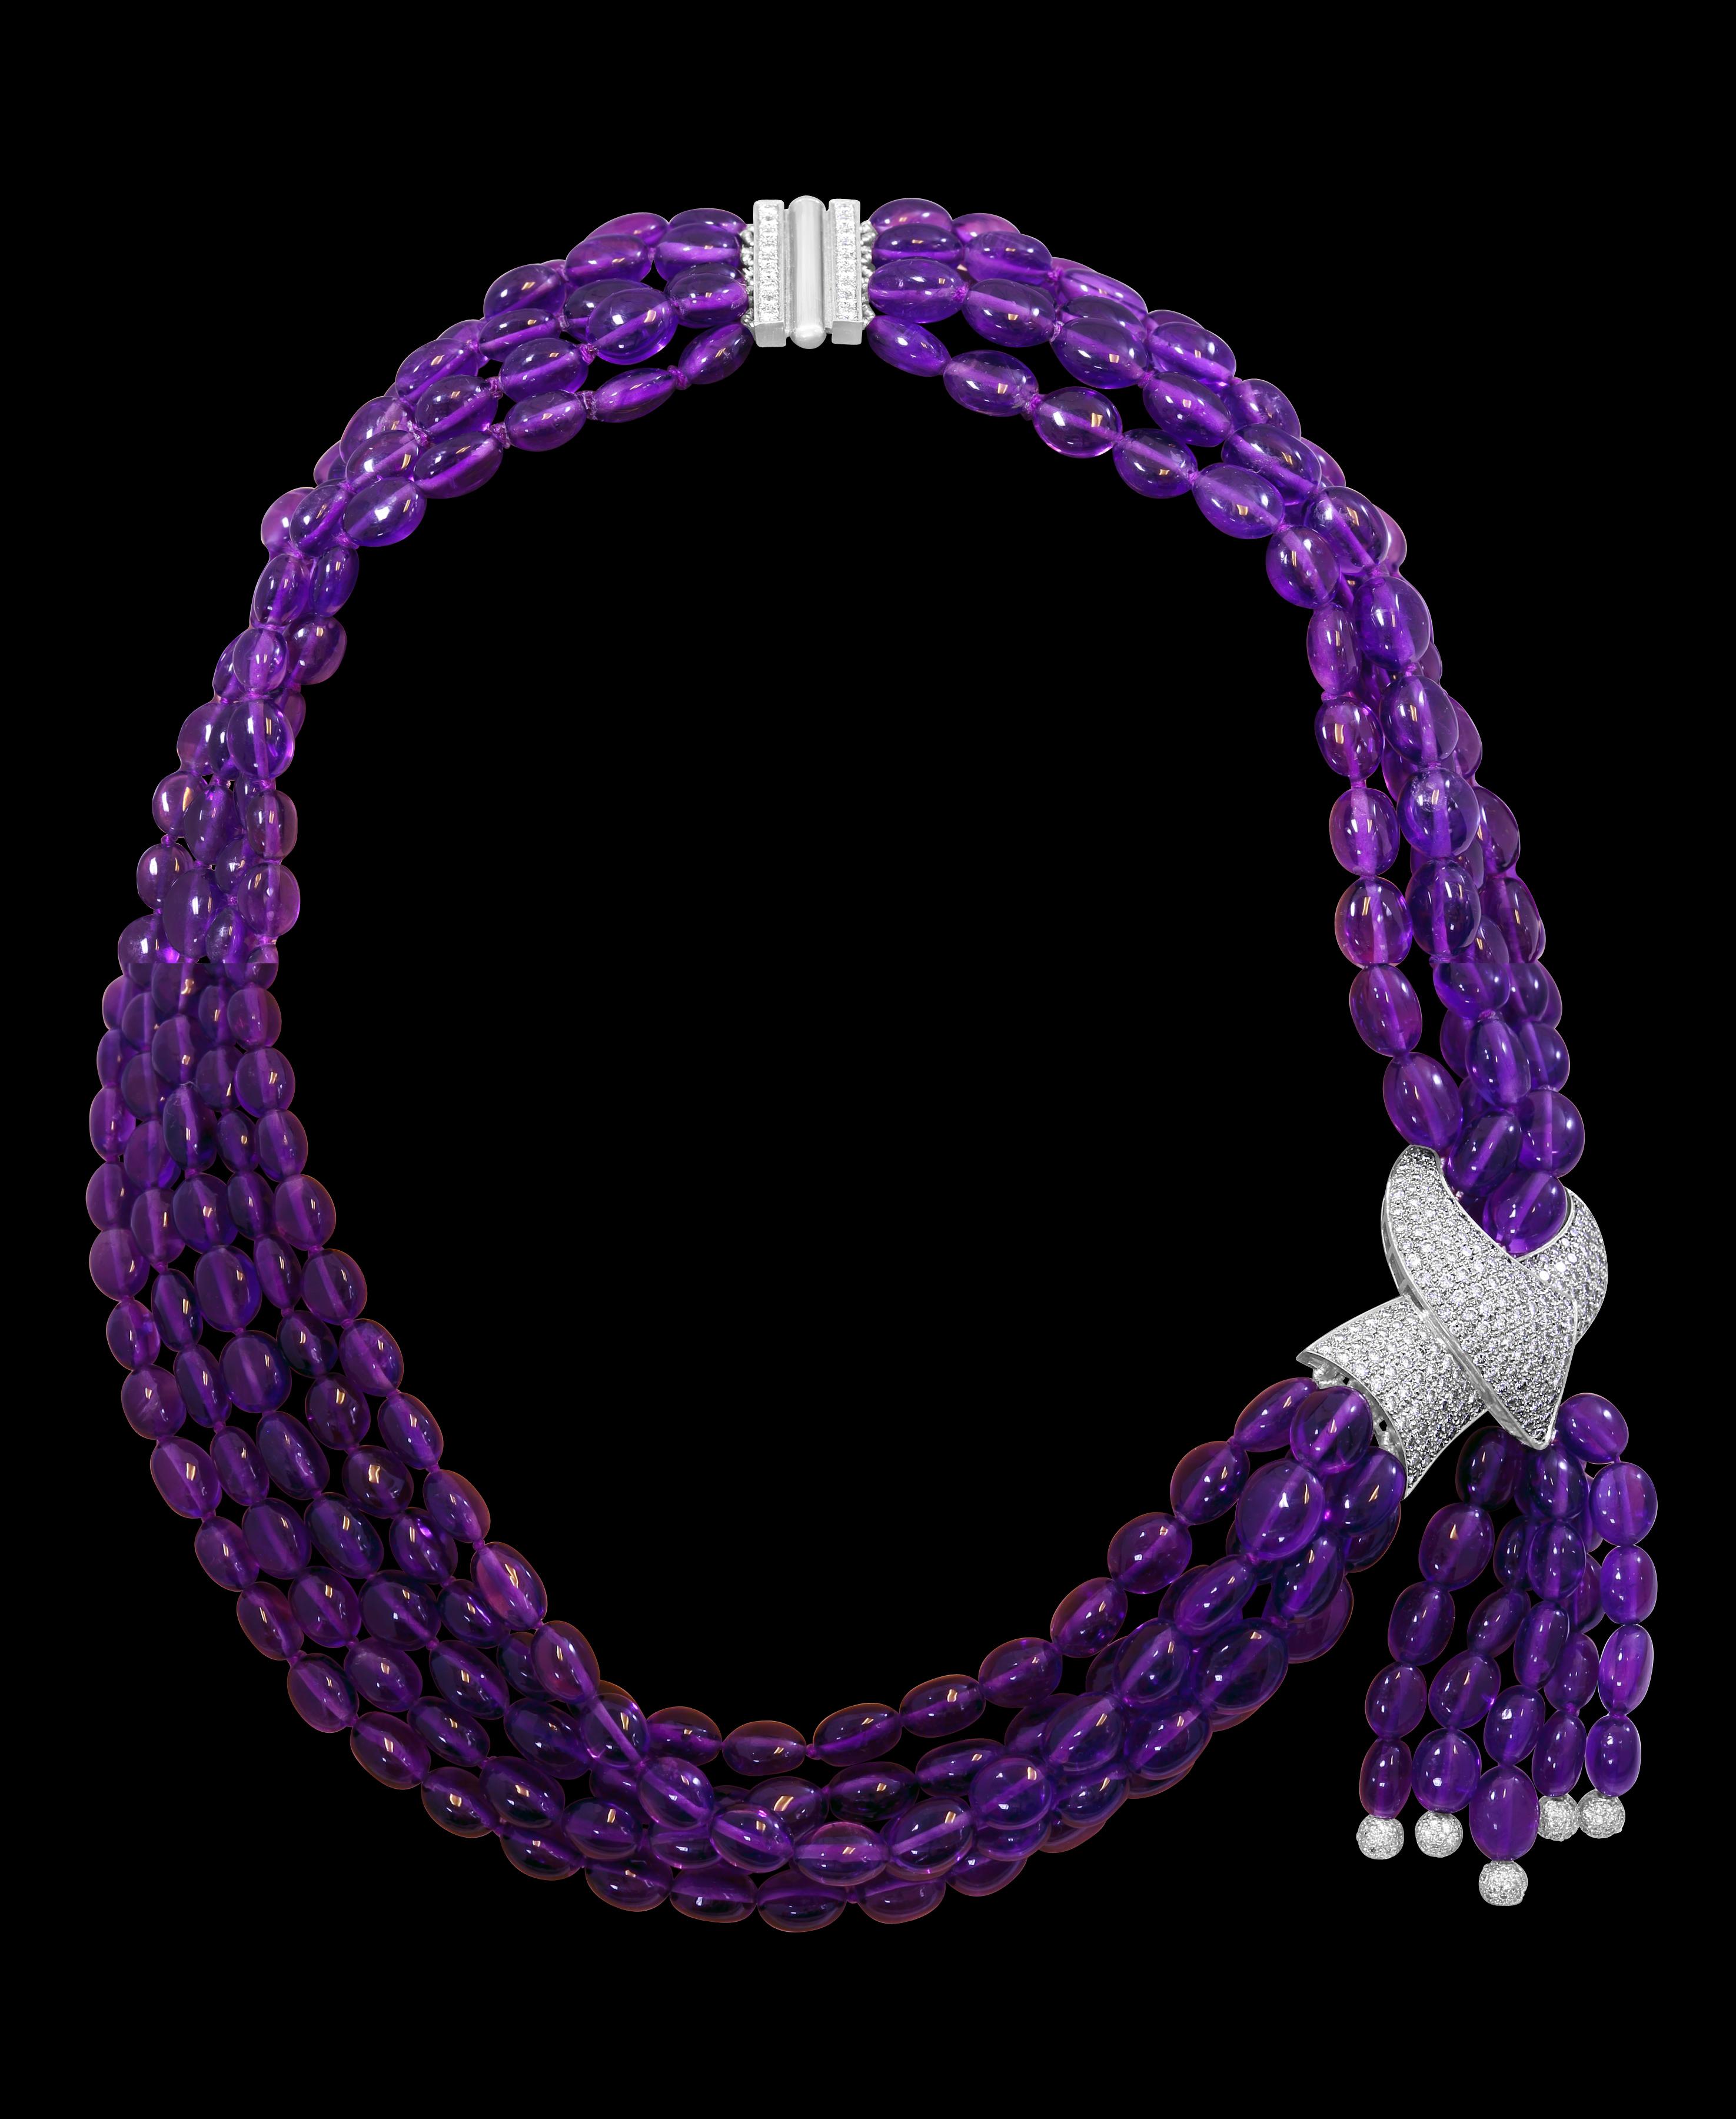 Introducing our exquisite Platinum Natural Amethyst Multi Layer Bead Necklace, adorned with a stunning 9 carats of fine quality diamonds. This necklace features five layers of natural amethyst beads, carefully selected for their finest quality and